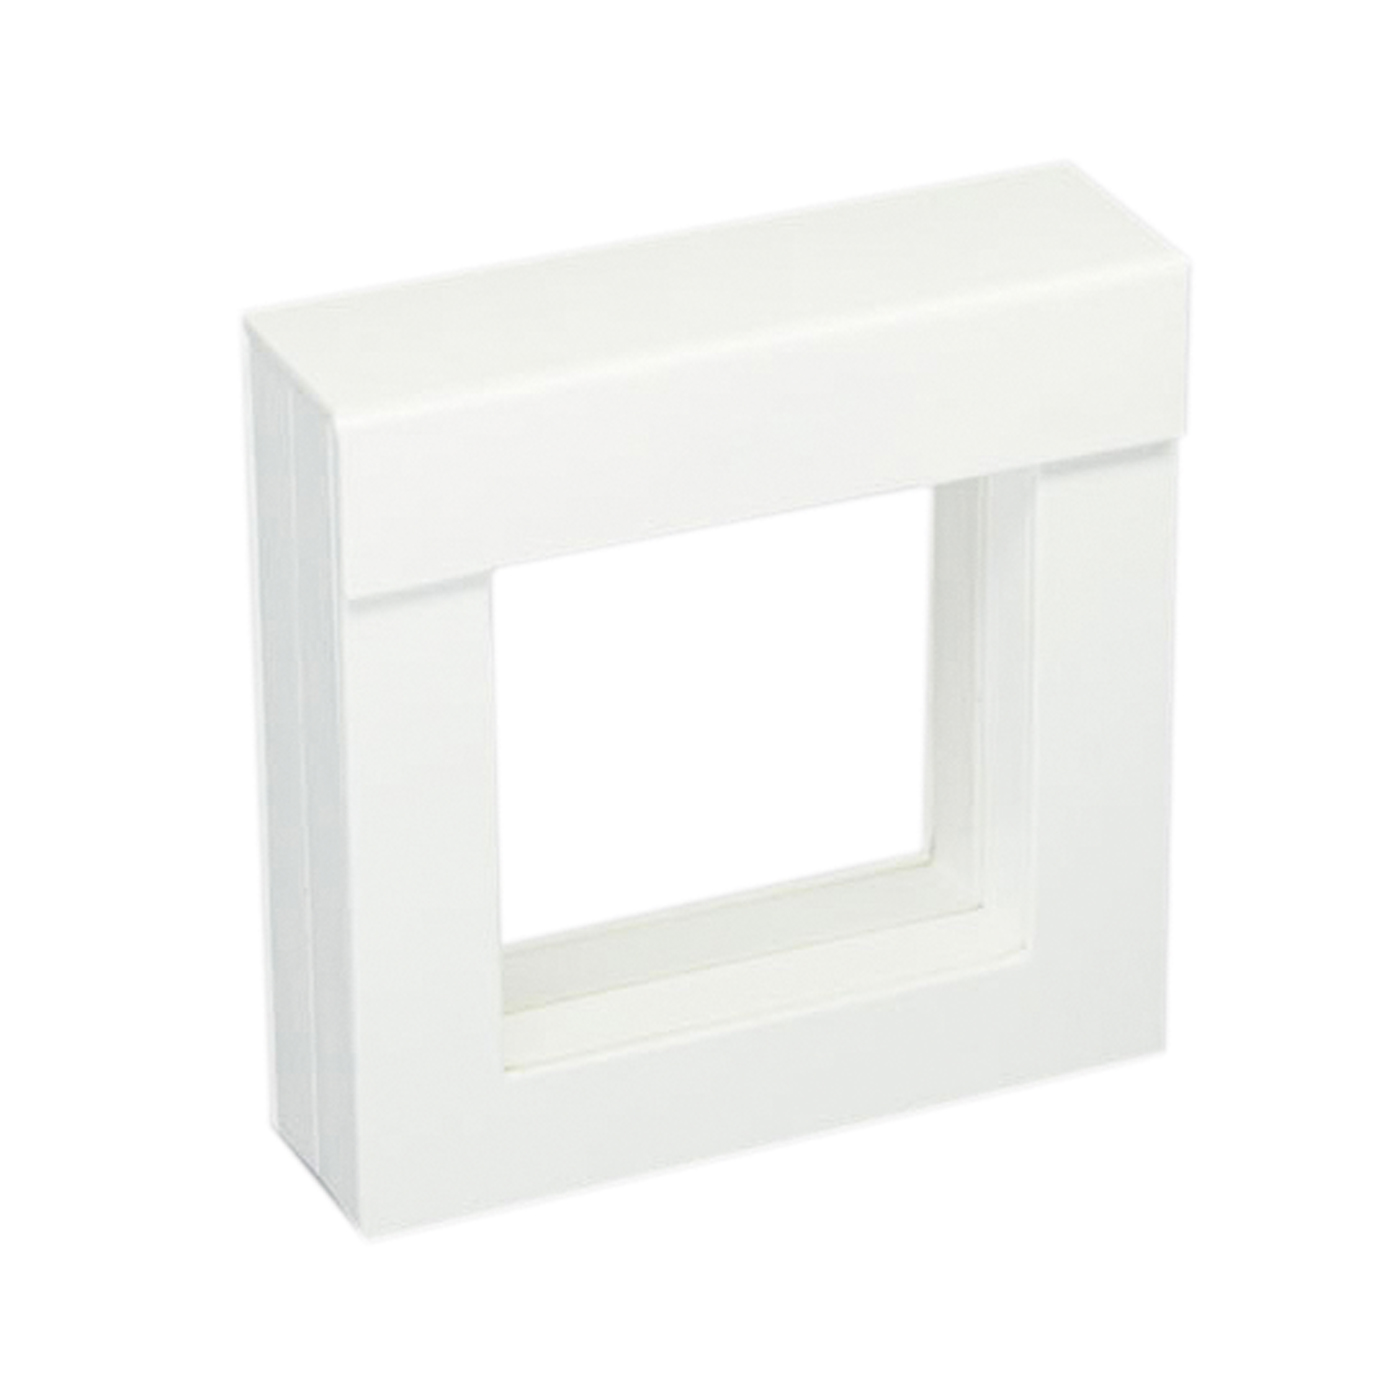 Jewellery Packaging "Frame", White, 70 x 70 x 25 mm - 1 piece